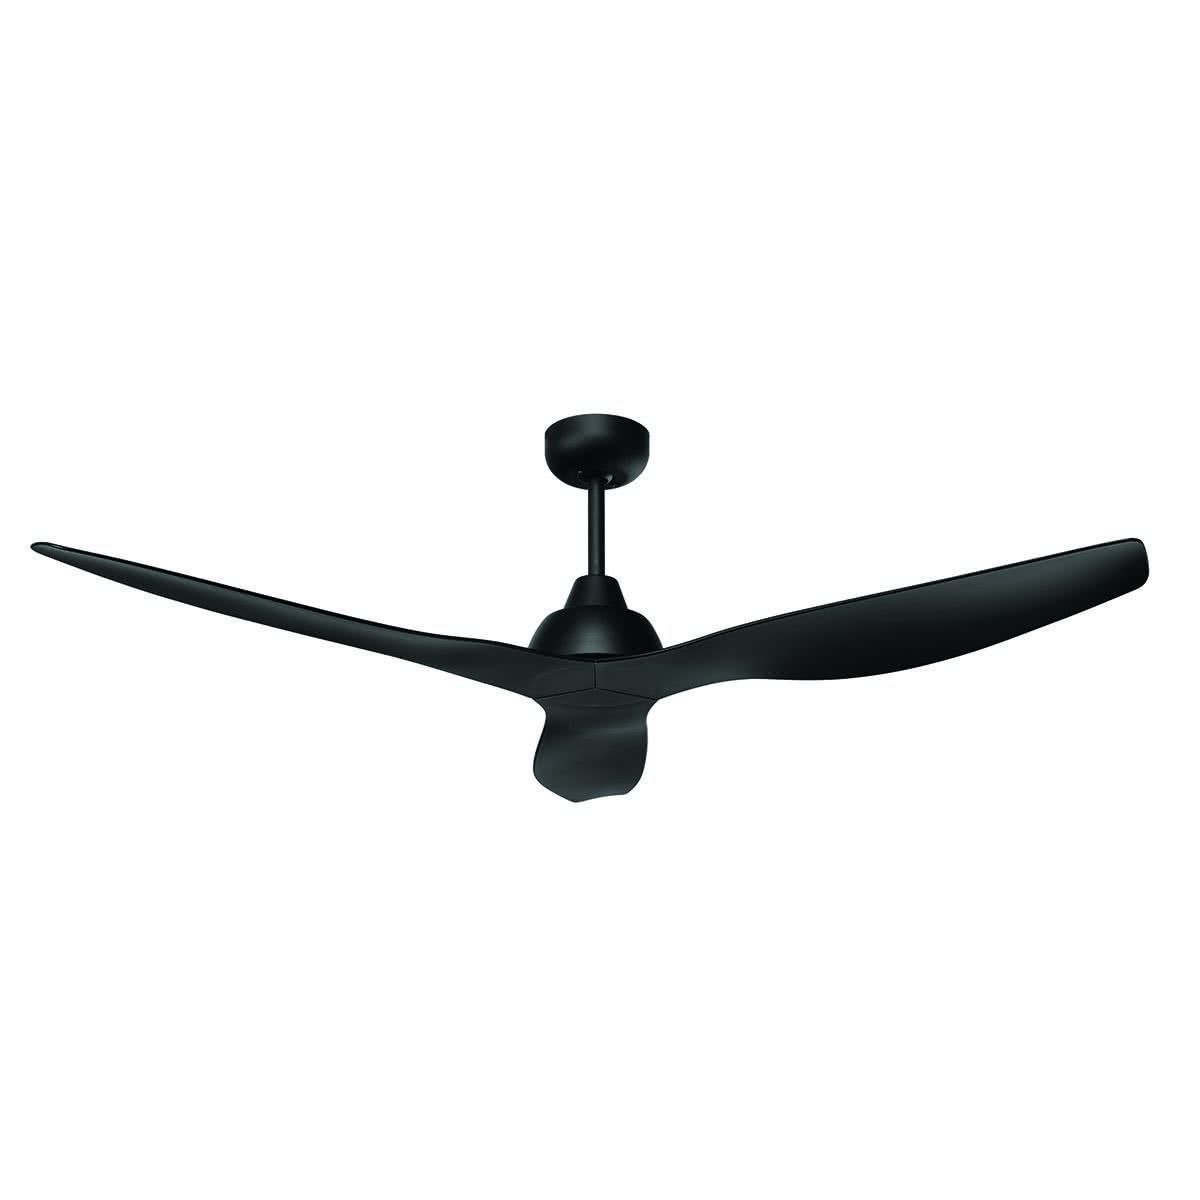 Bahama 52" Dc Abs 3 Blade Ceiling Fan With Remote Control